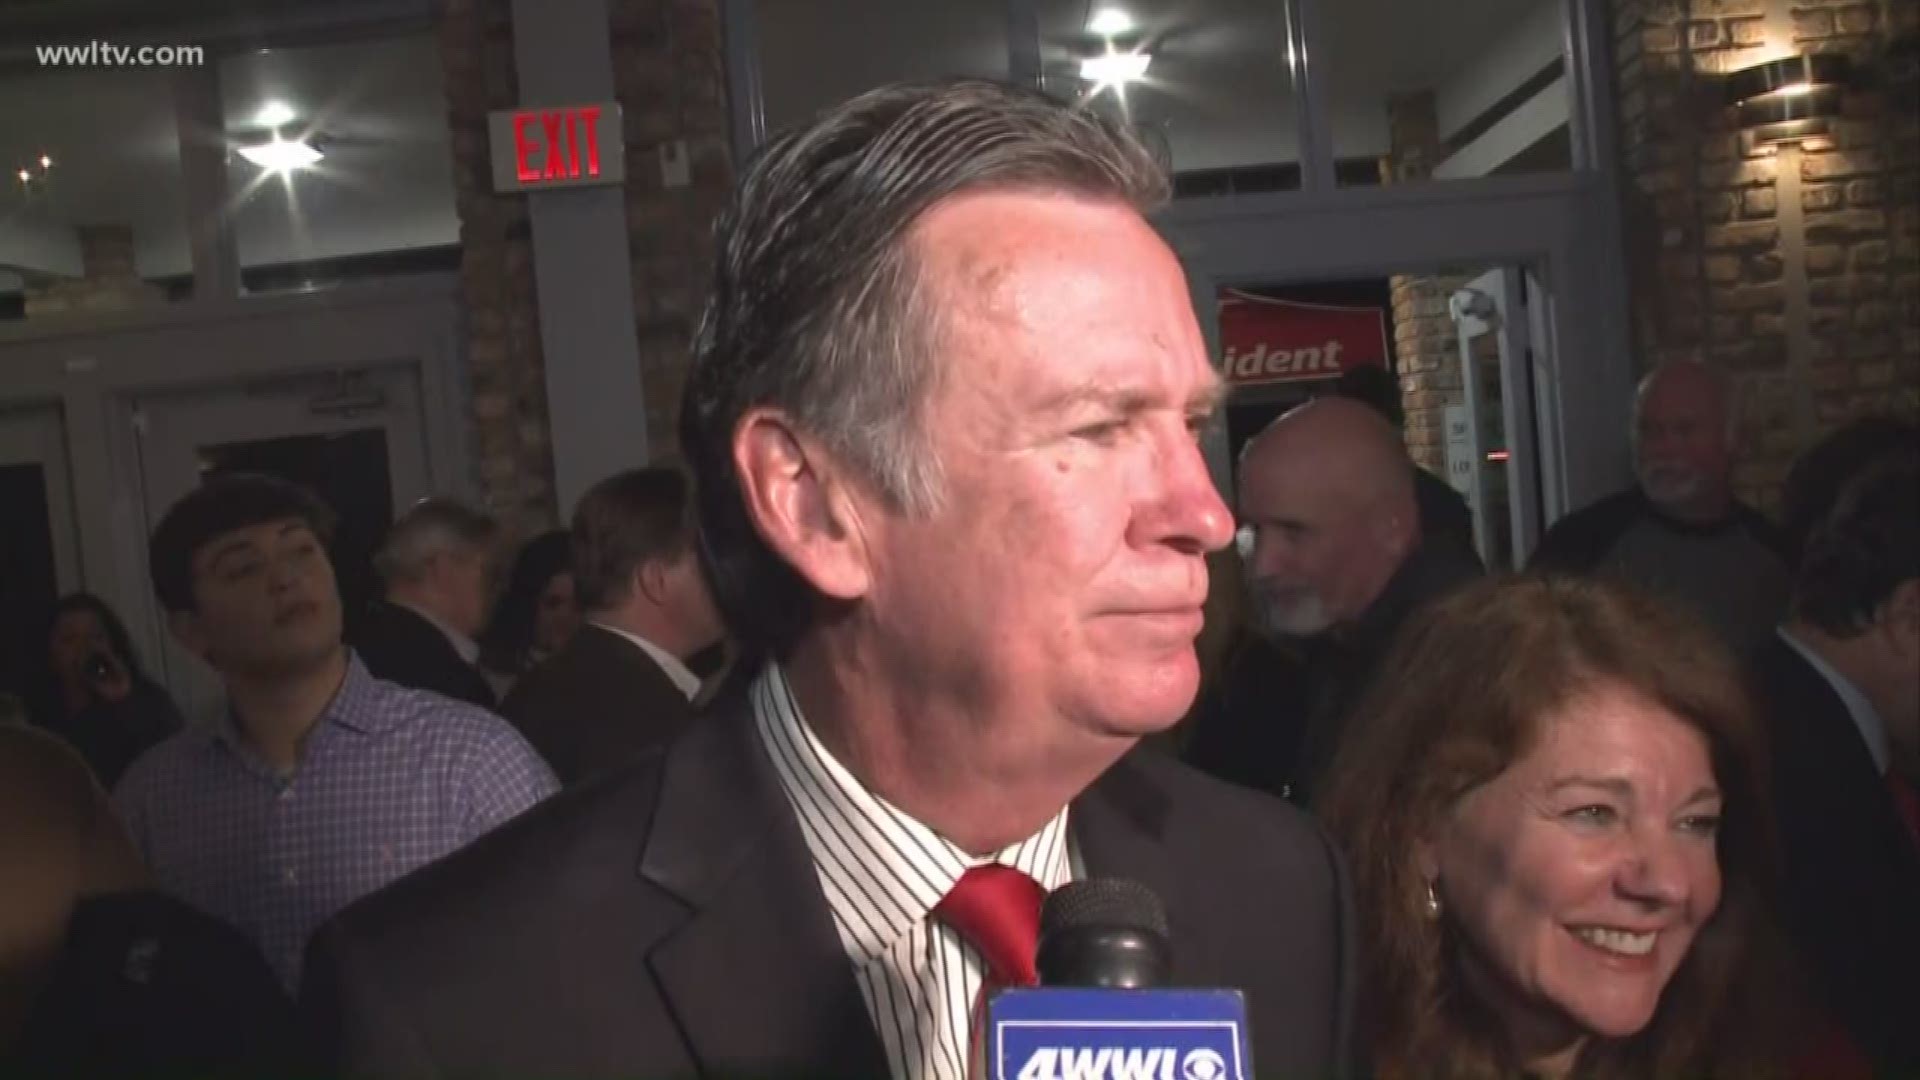 Mike Cooper thanks voters after winning St. Tammany Parish President race